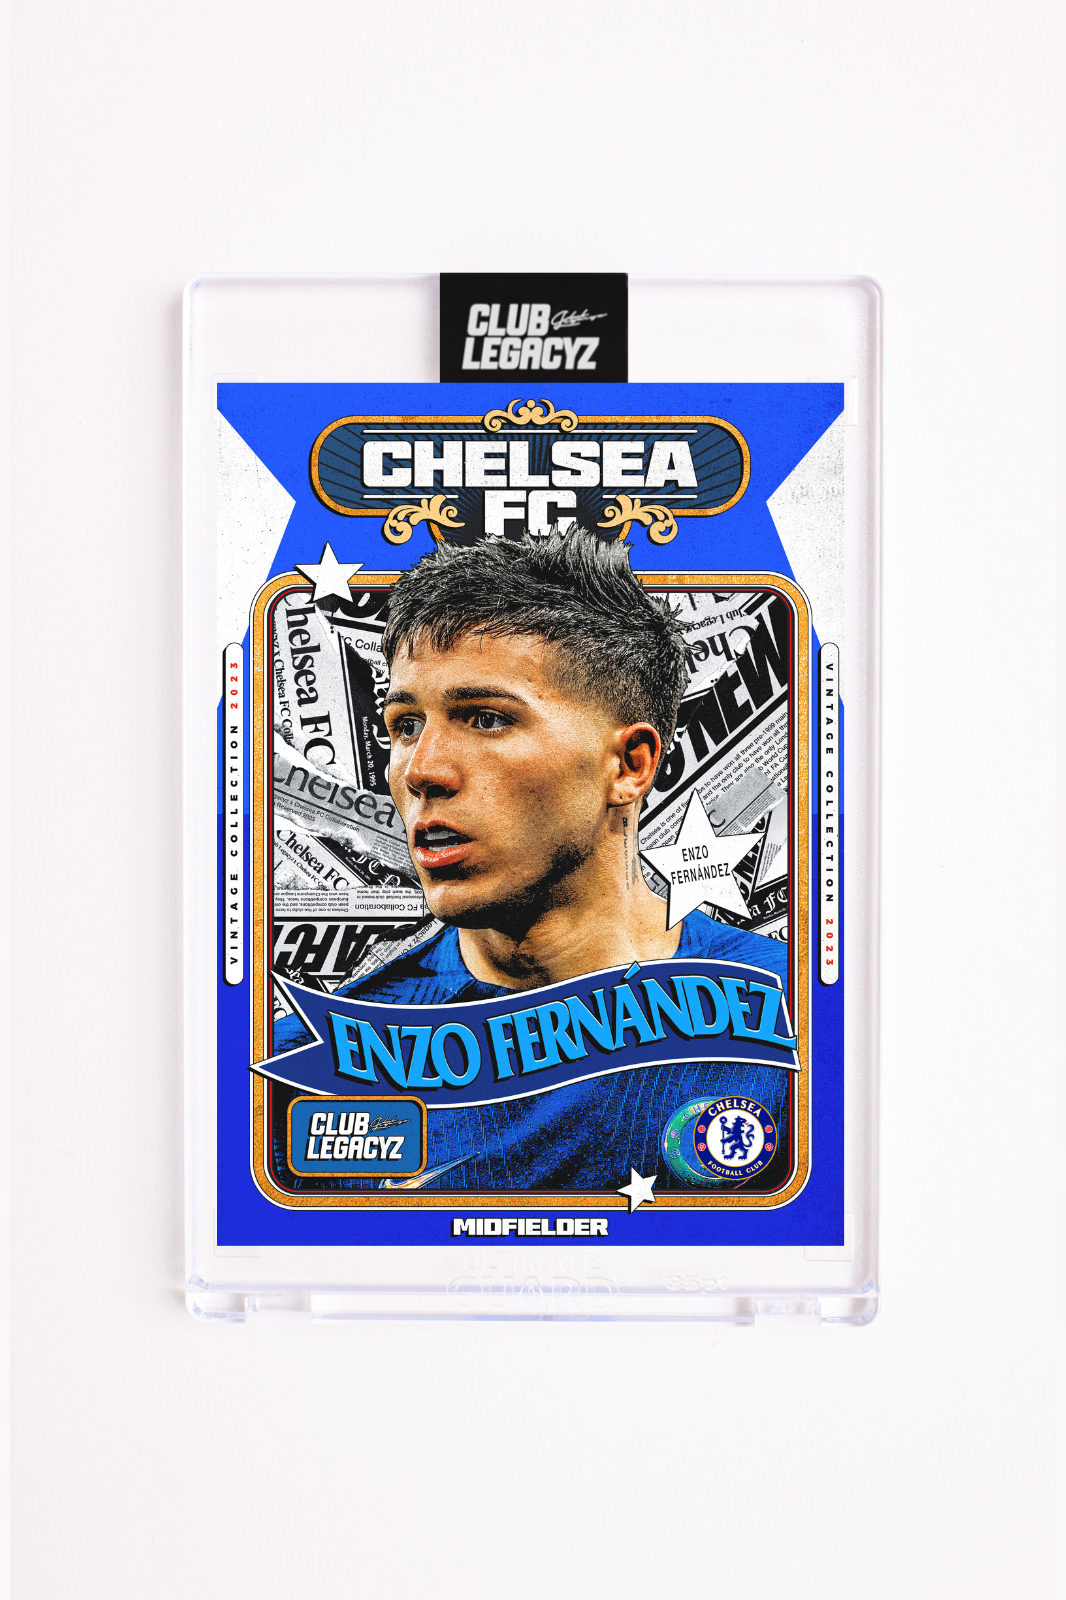 Chelsea FC - Enzo Fernández Retro Icon limited to 100